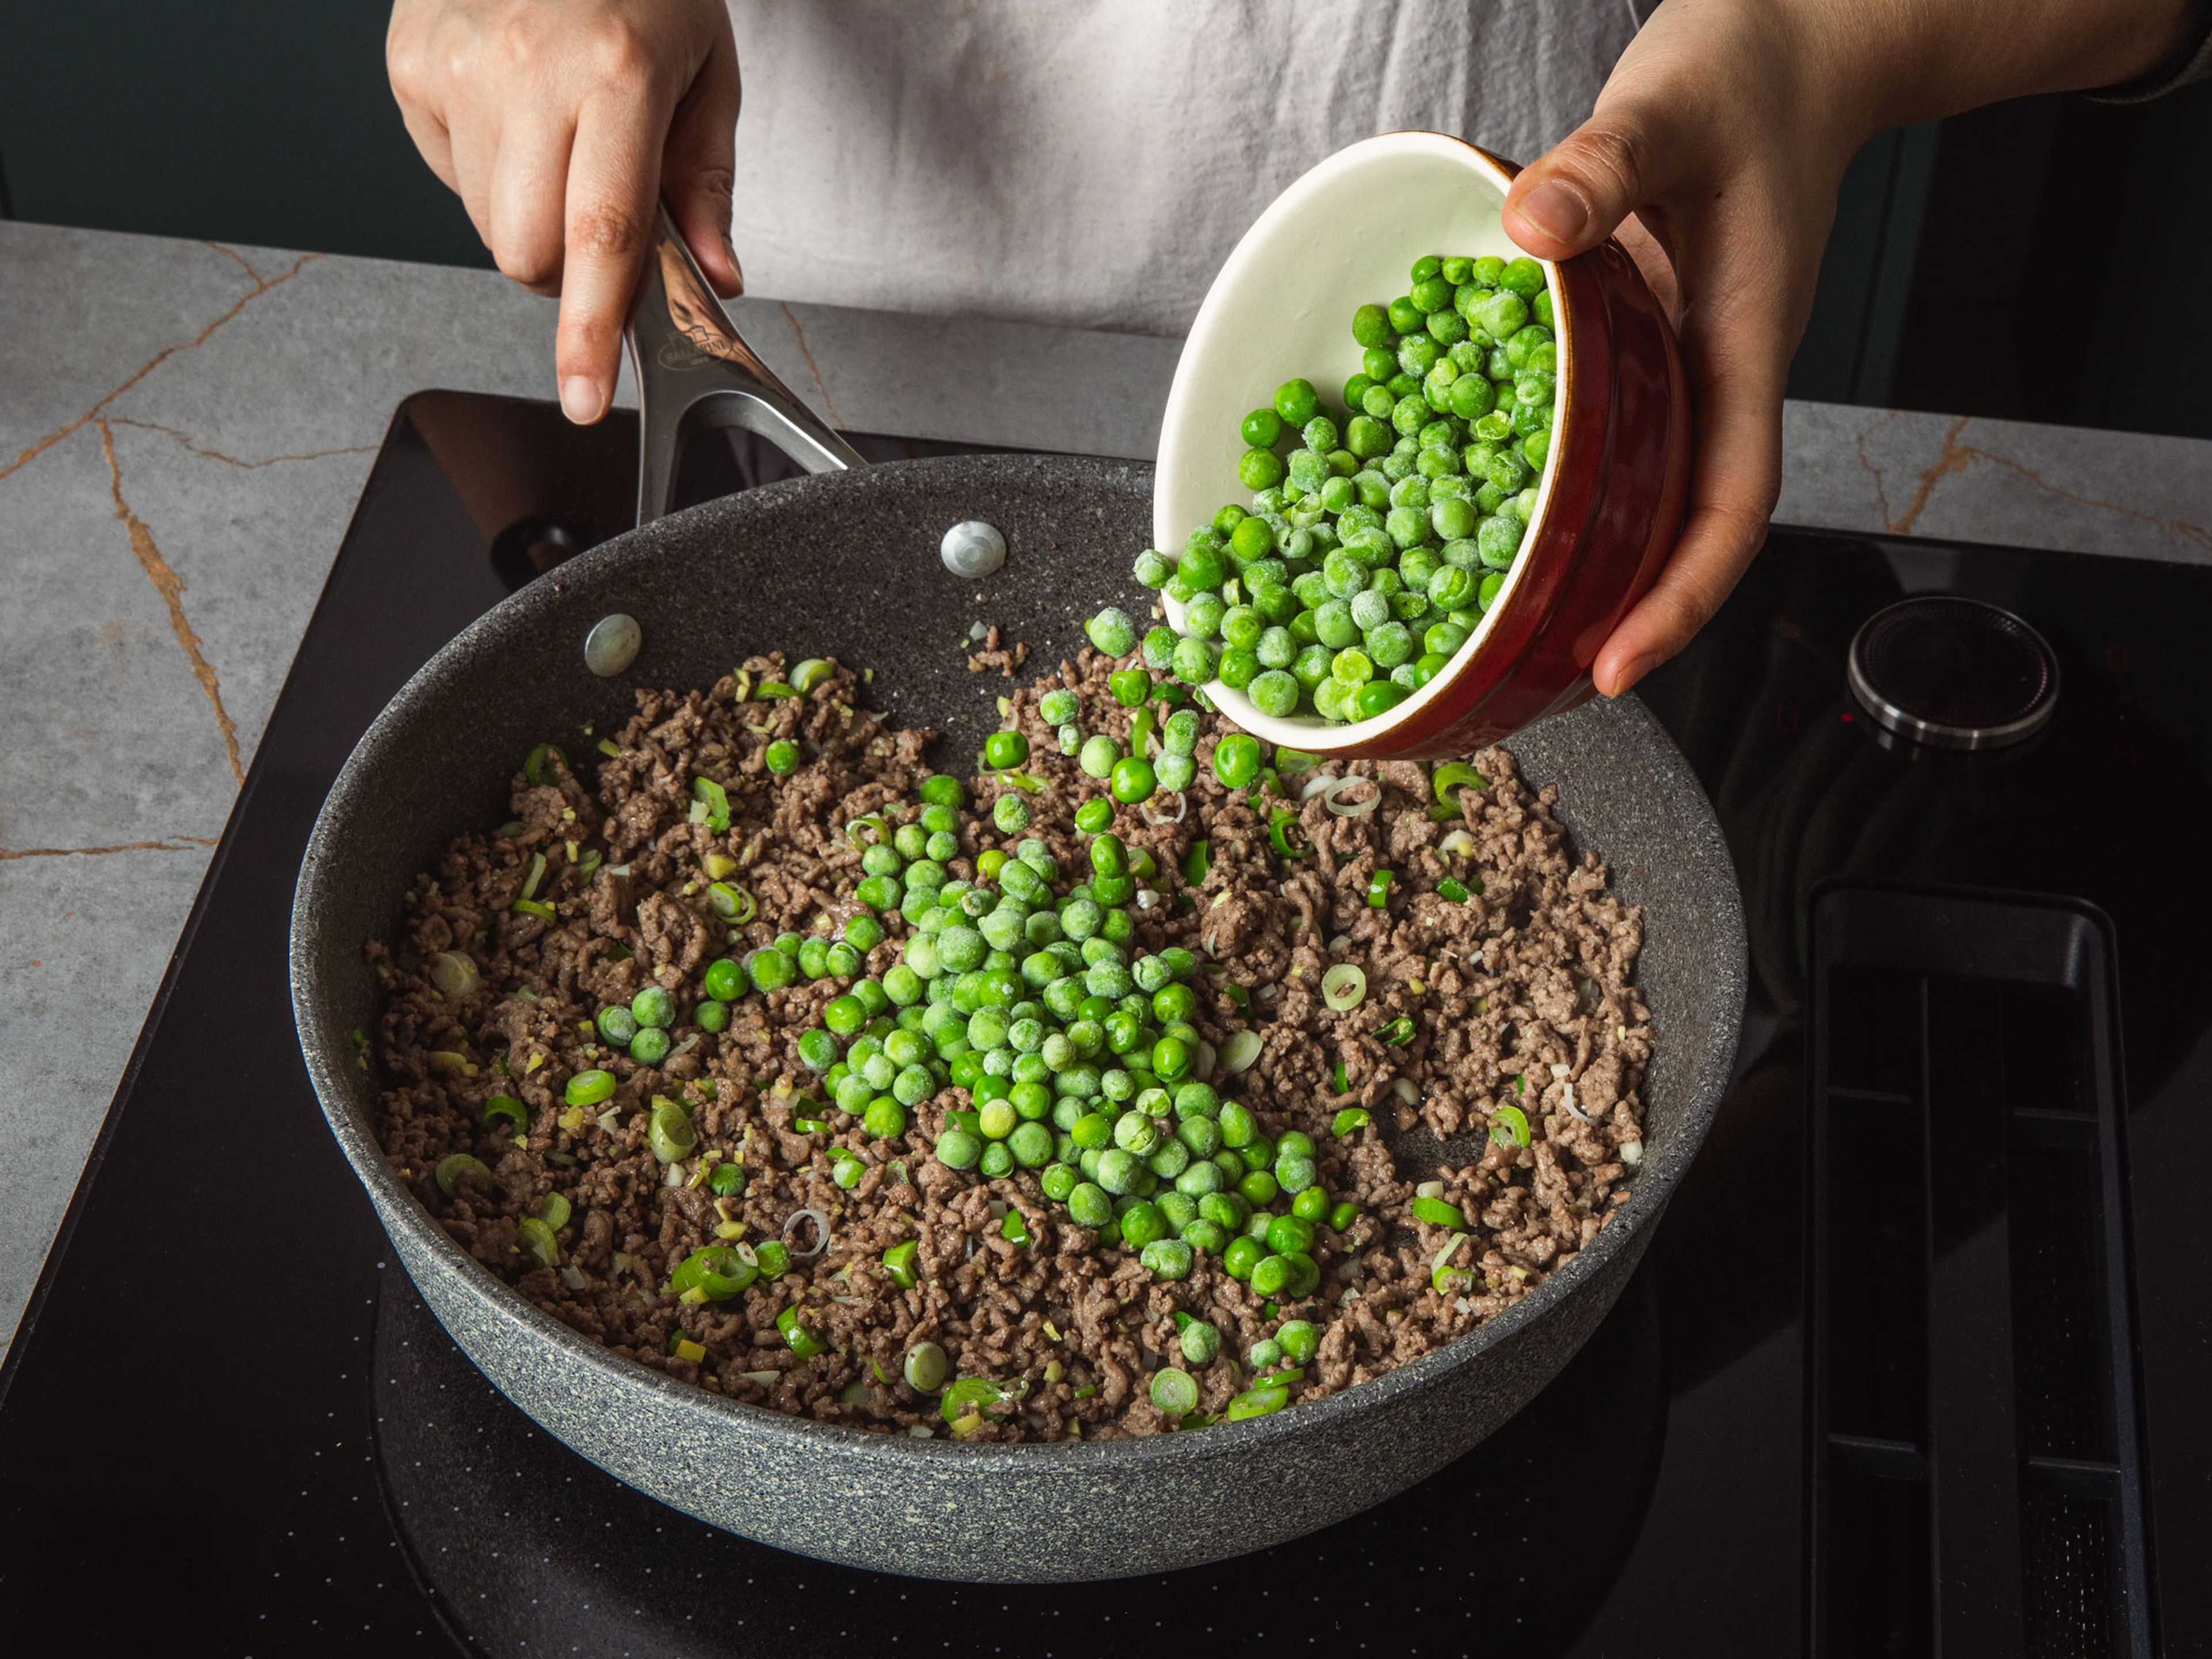 In a big frying pan, add beef mince, heat over medium heat and break it down with a spatula. Fry for approx. 7–8 min, until the meat is brown and starts to crisp up. Add scallion whites, ginger, and garlic. Stir to combine and fry for approx. 1 min. until fragrant. Then add the frozen peas and the sauce. Fry for approx. 5 min. until the sauce is reduced and the peas are cooked. Serve over the cooked rice and garnish with scallion greens.